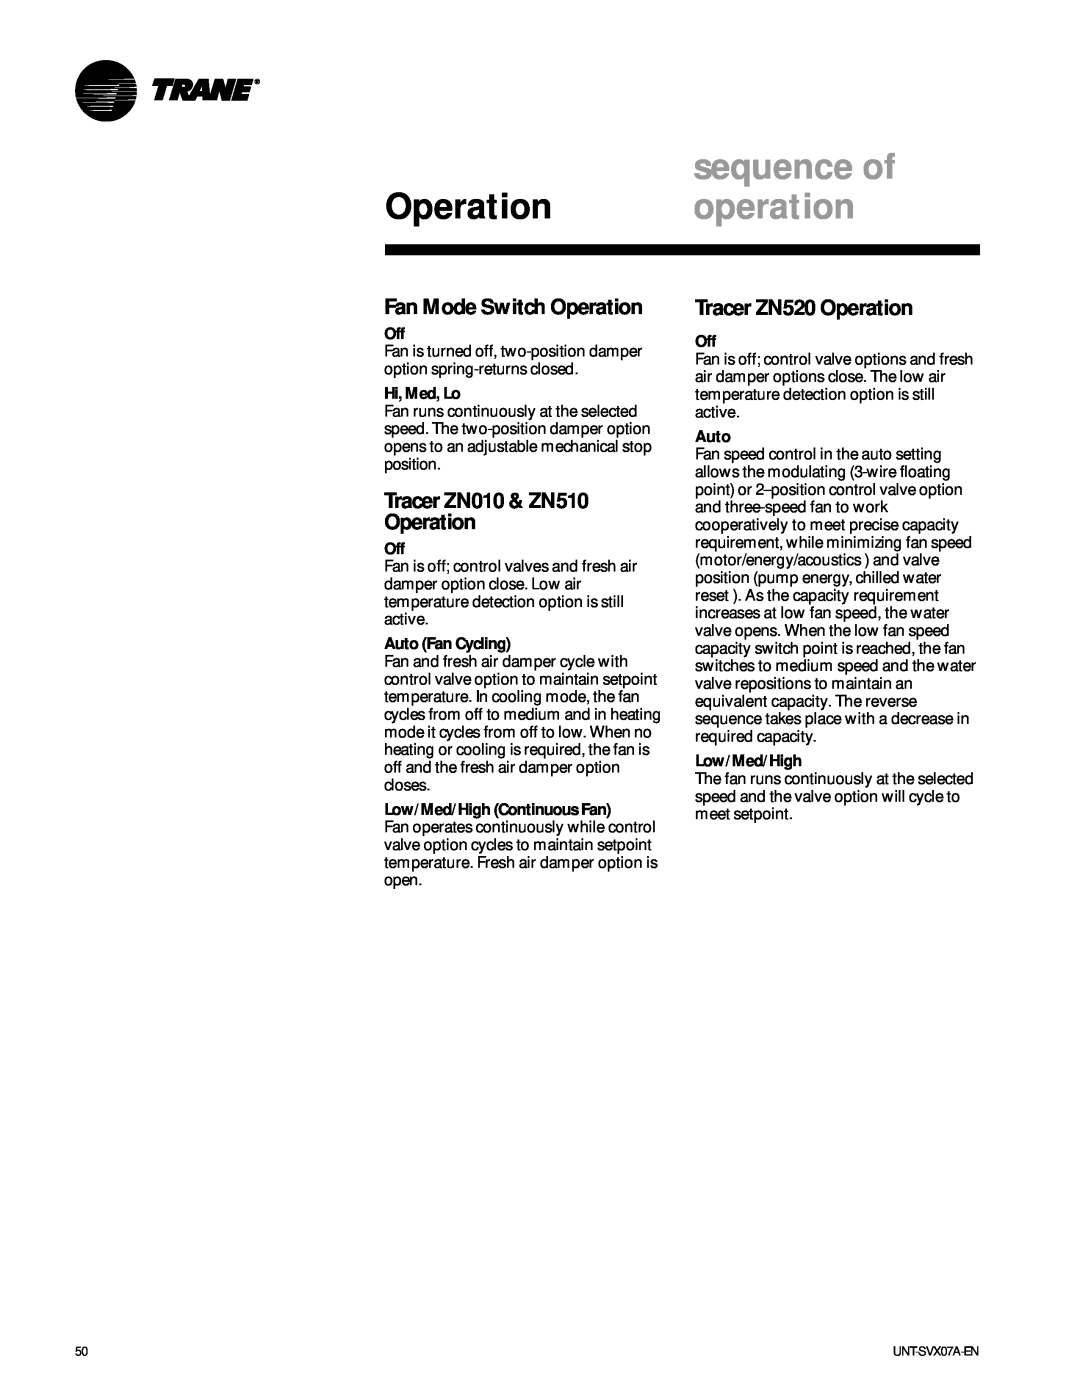 Trane UNT-SVX07A-EN sequence of, Operation operation, Fan Mode Switch Operation, Tracer ZN010 & ZN510 Operation, Auto 